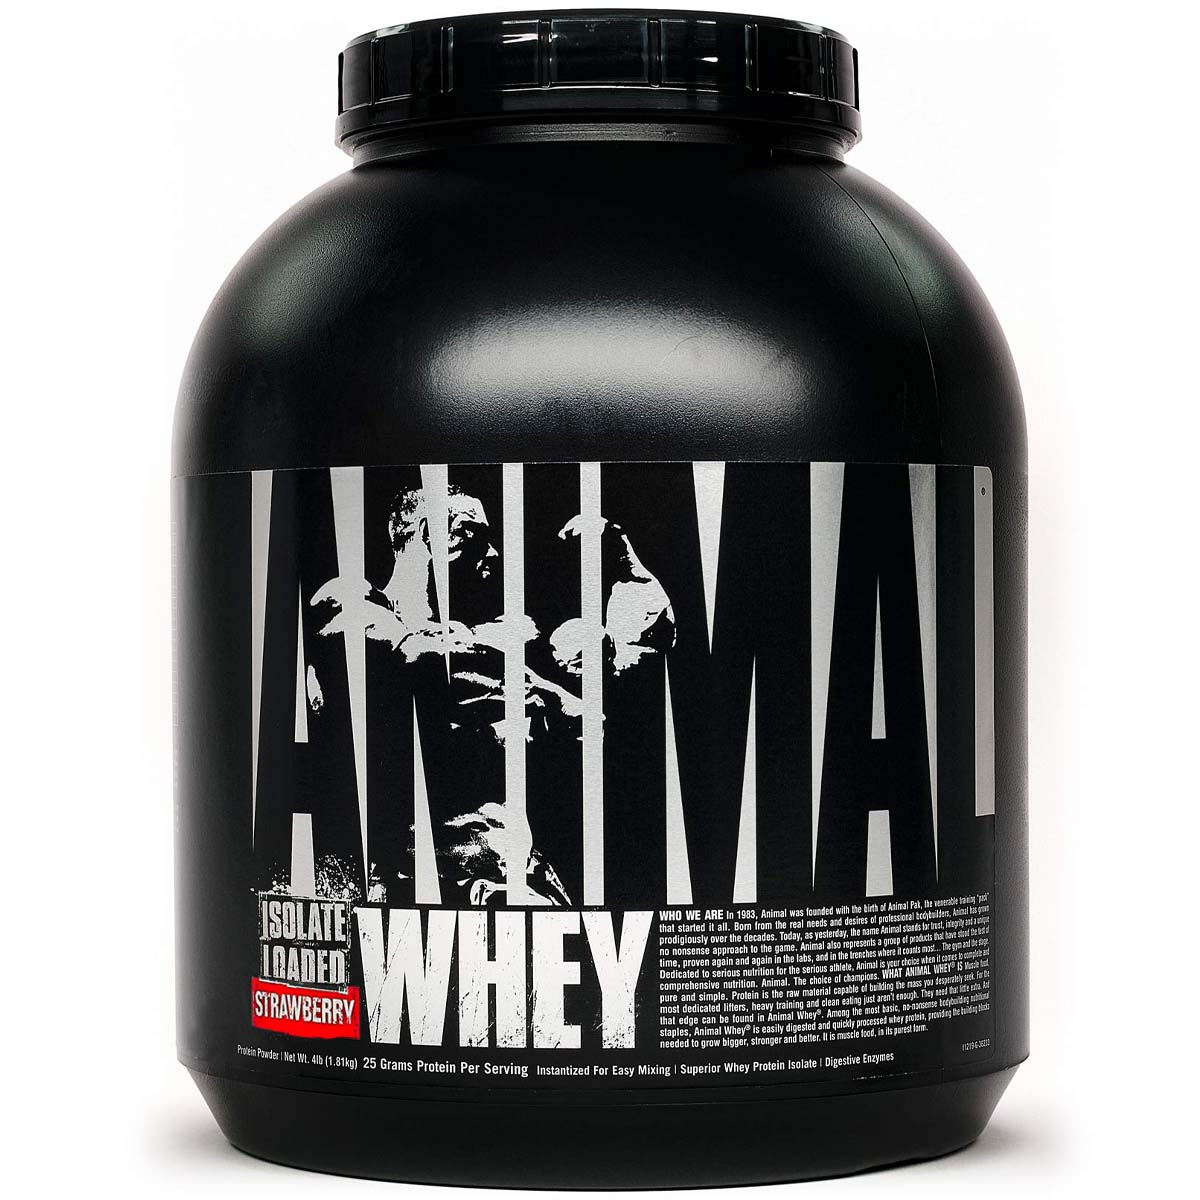 Universal Nutrition Animal Whey Isolate Loaded, Strawberry, 4 LB